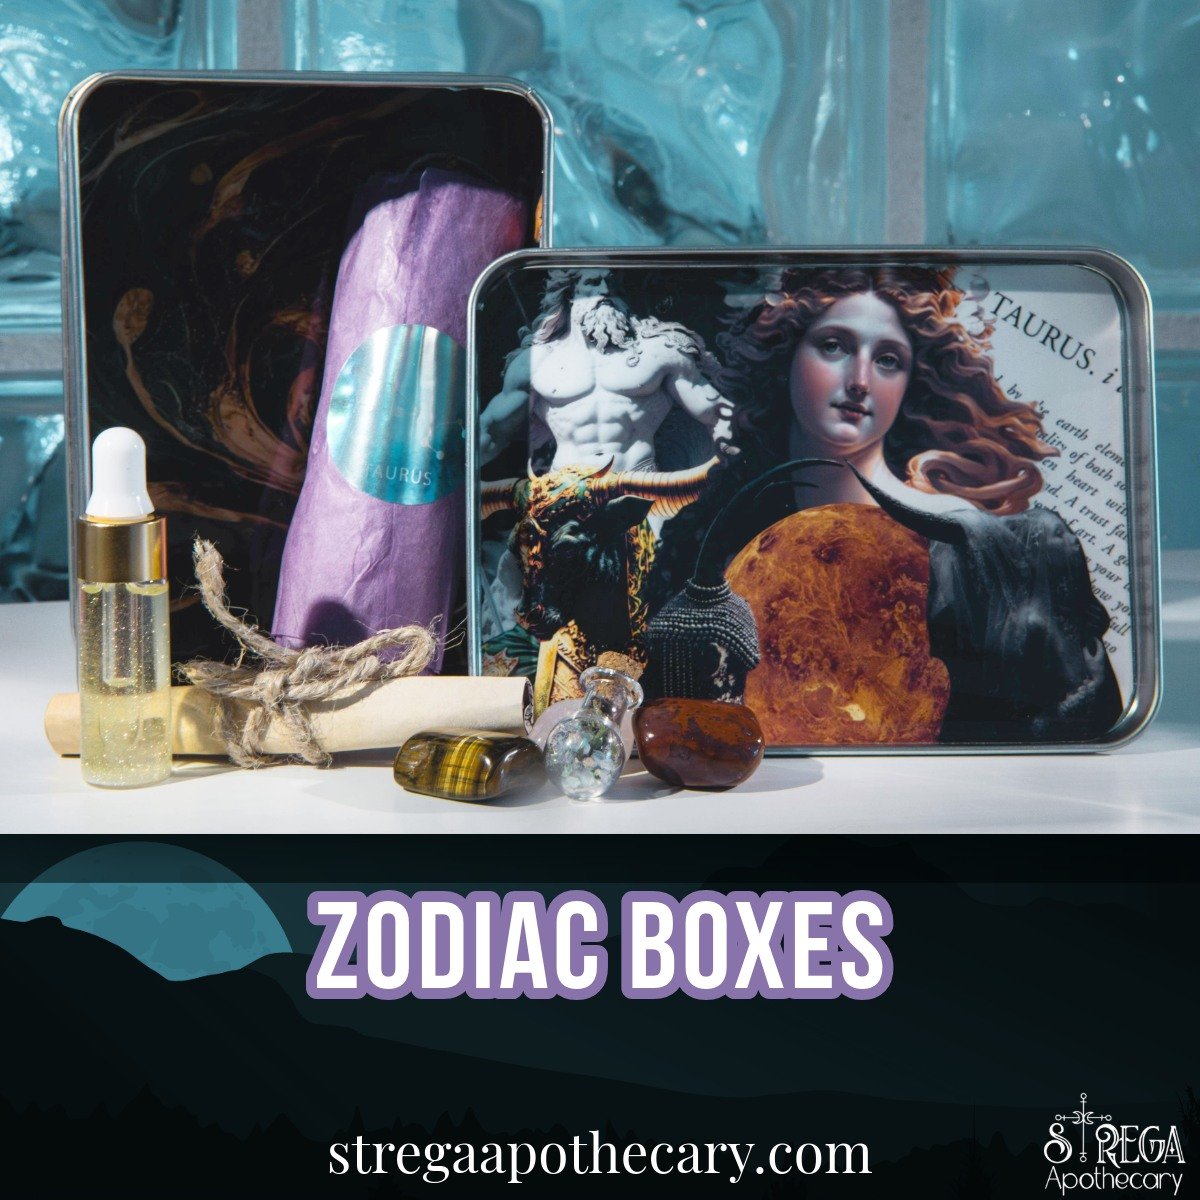 Our exquisite Taurus Zodiac Boxes are designed to celebrate your elegance and determination.  Tauruses possess a unique blend of grace, diligence, and unwavering reliability, so whether treating yourself or honoring the Taurus in your life, our Zodia